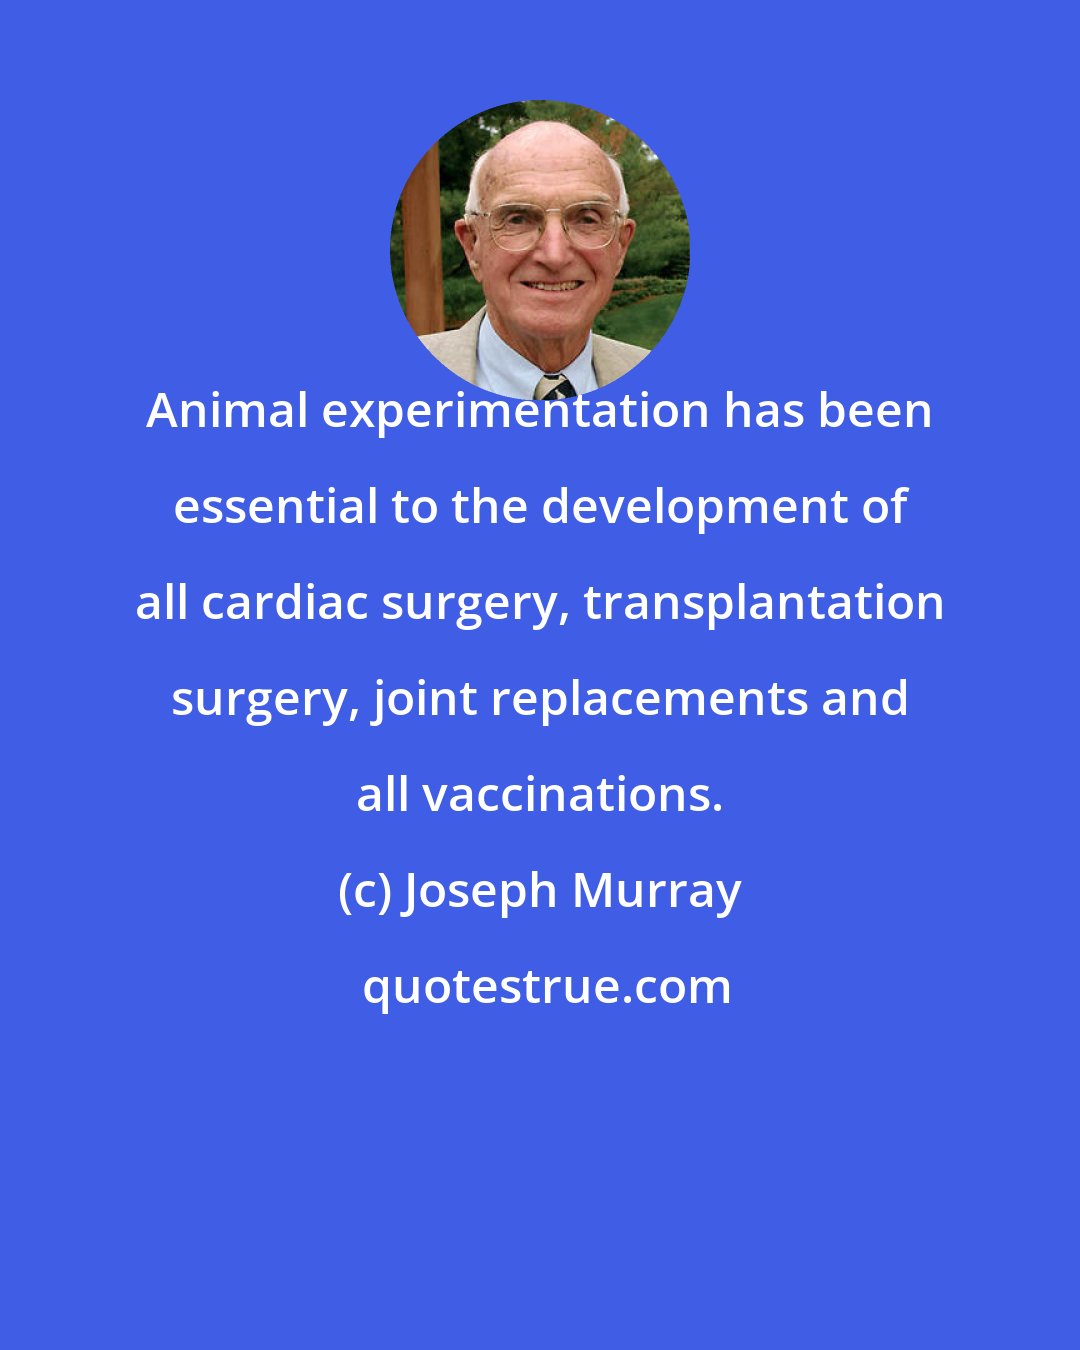 Joseph Murray: Animal experimentation has been essential to the development of all cardiac surgery, transplantation surgery, joint replacements and all vaccinations.